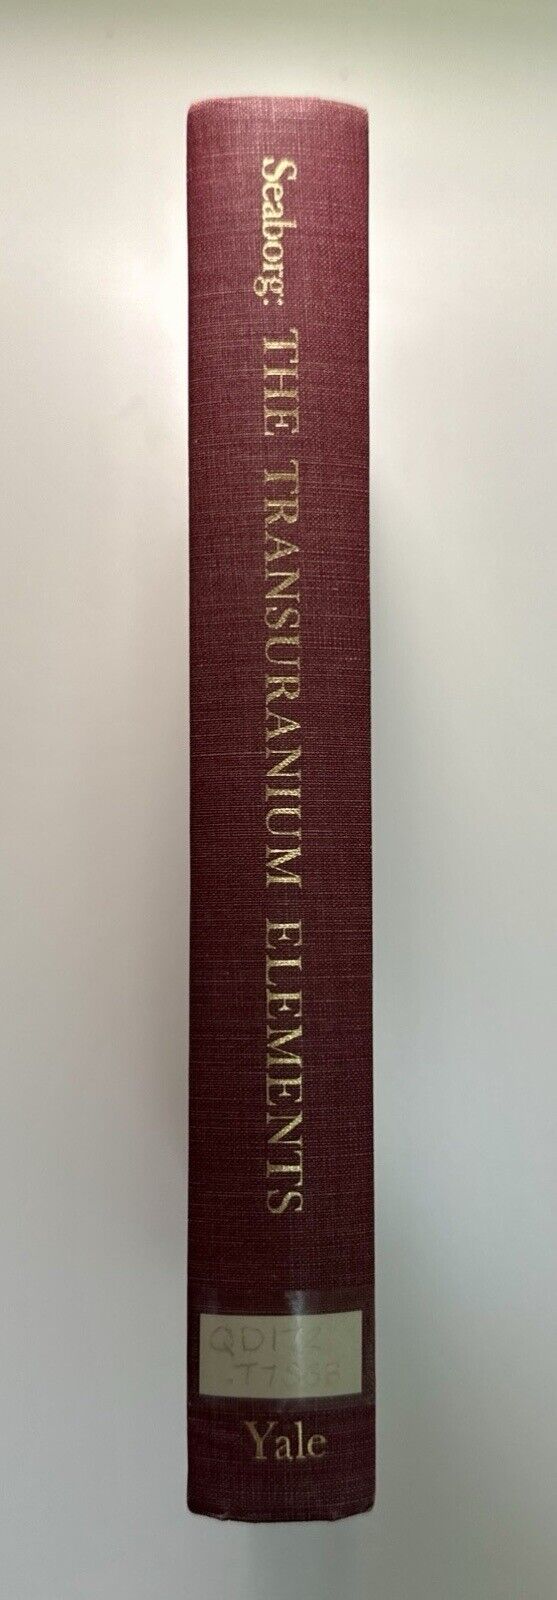 Vintage 1958 Nuclear 1st Edition-Transuranic Elements by Glen Seaborg HC